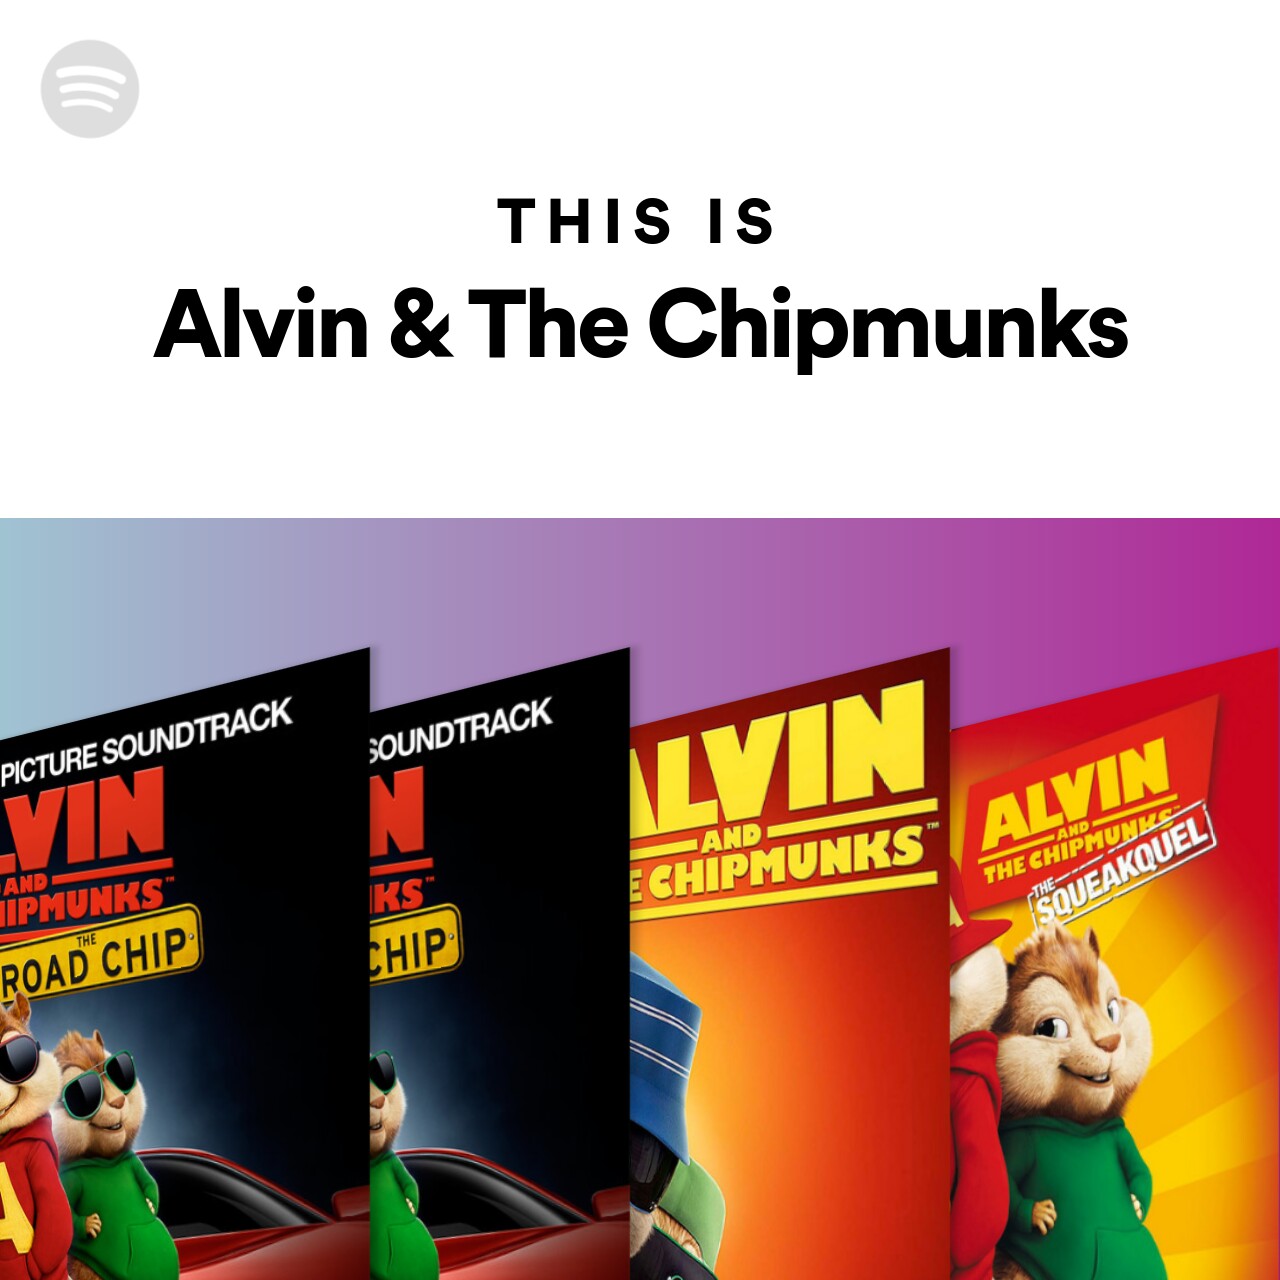 This Is Alvin & The Chipmunks